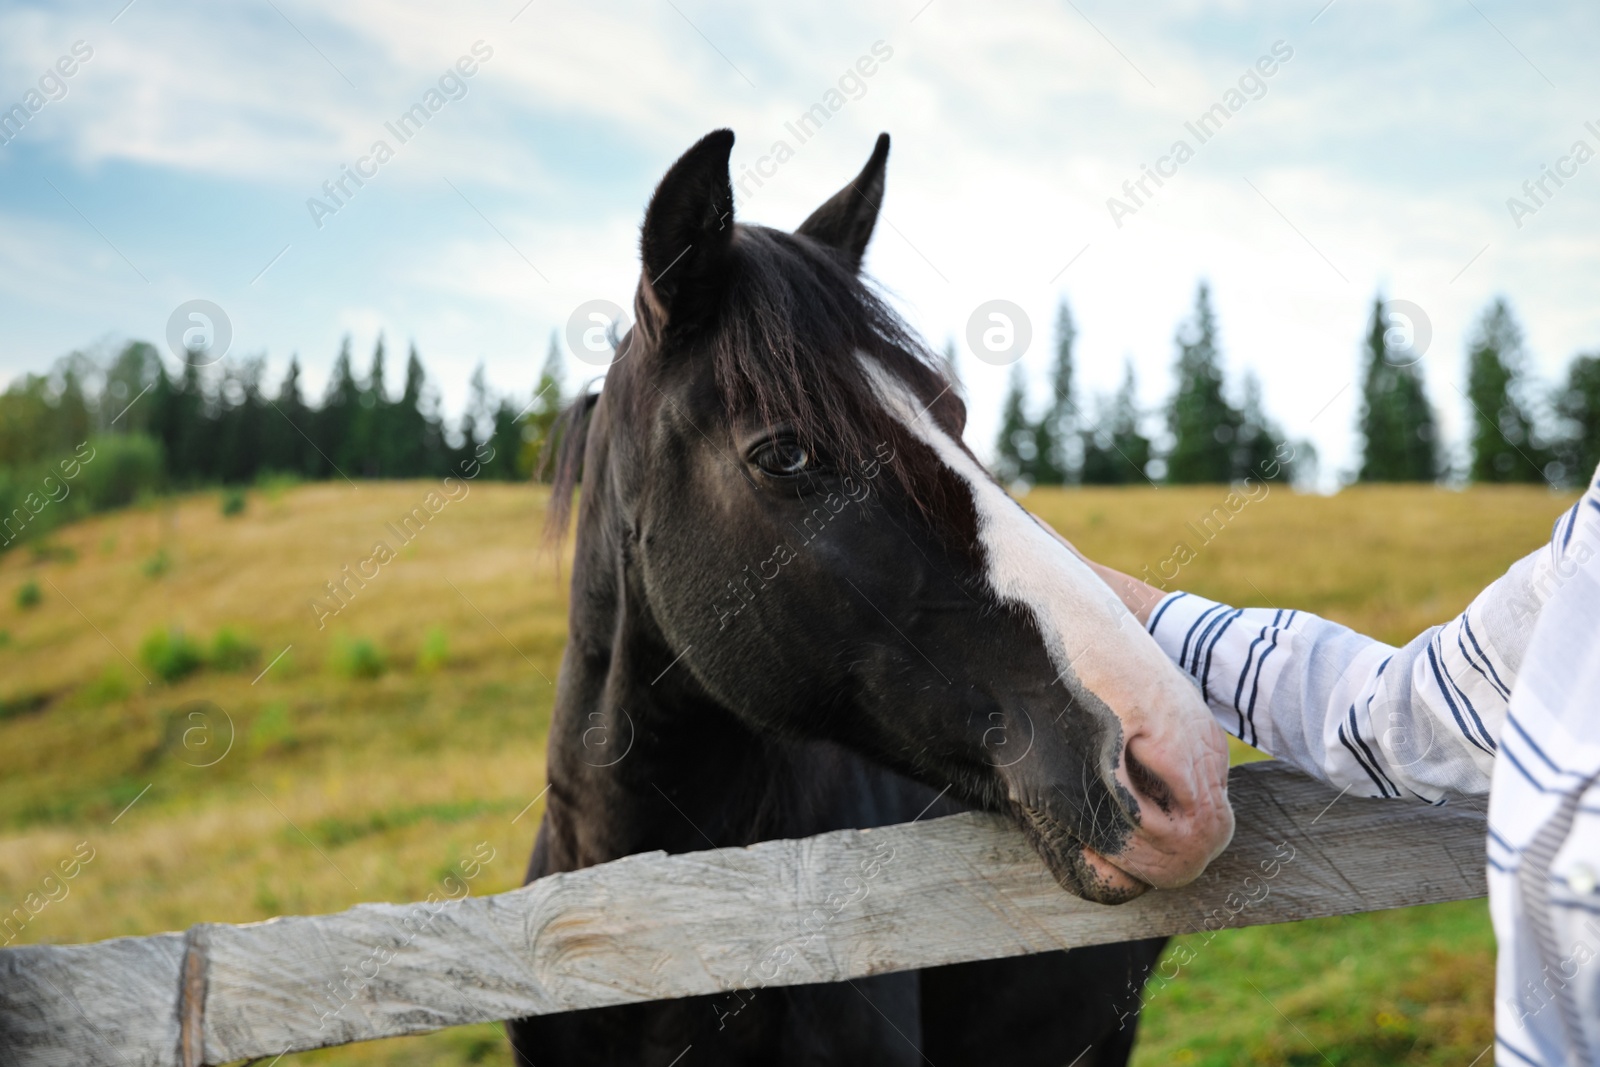 Photo of Woman stroking beautiful horse near wooden fence outdoors, closeup. Lovely domesticated pet